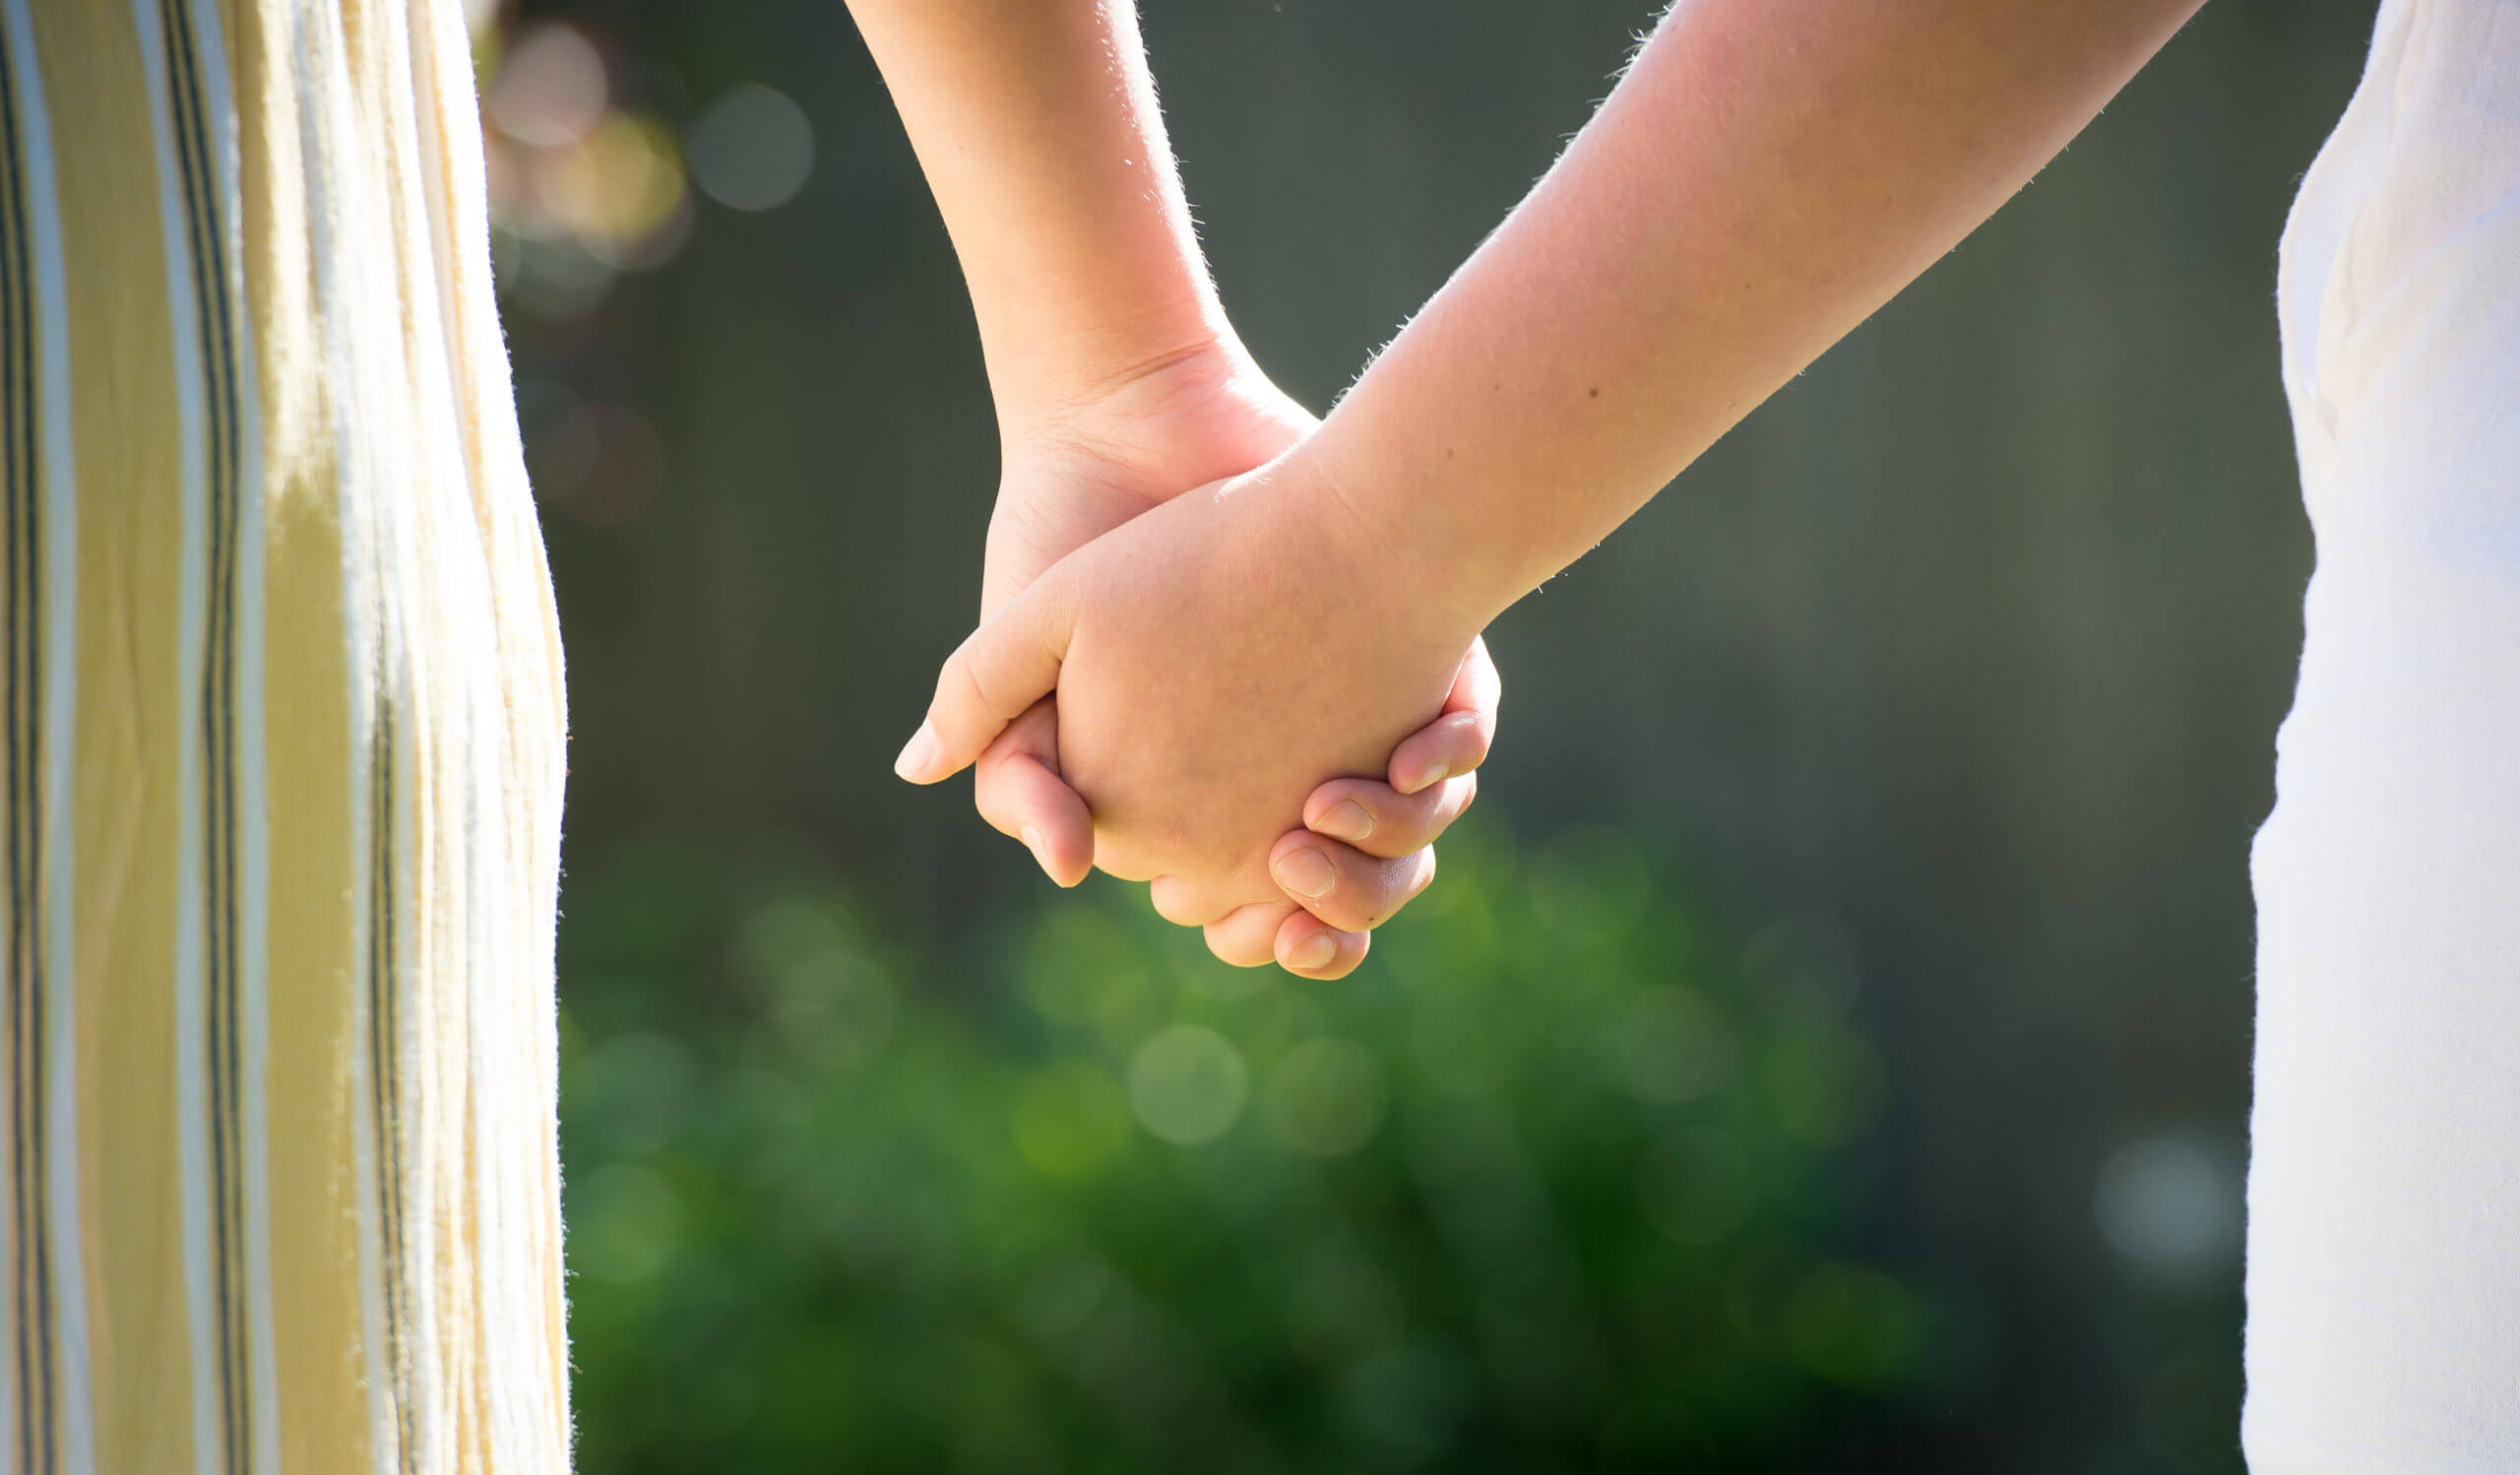 Two individuals hold hands.